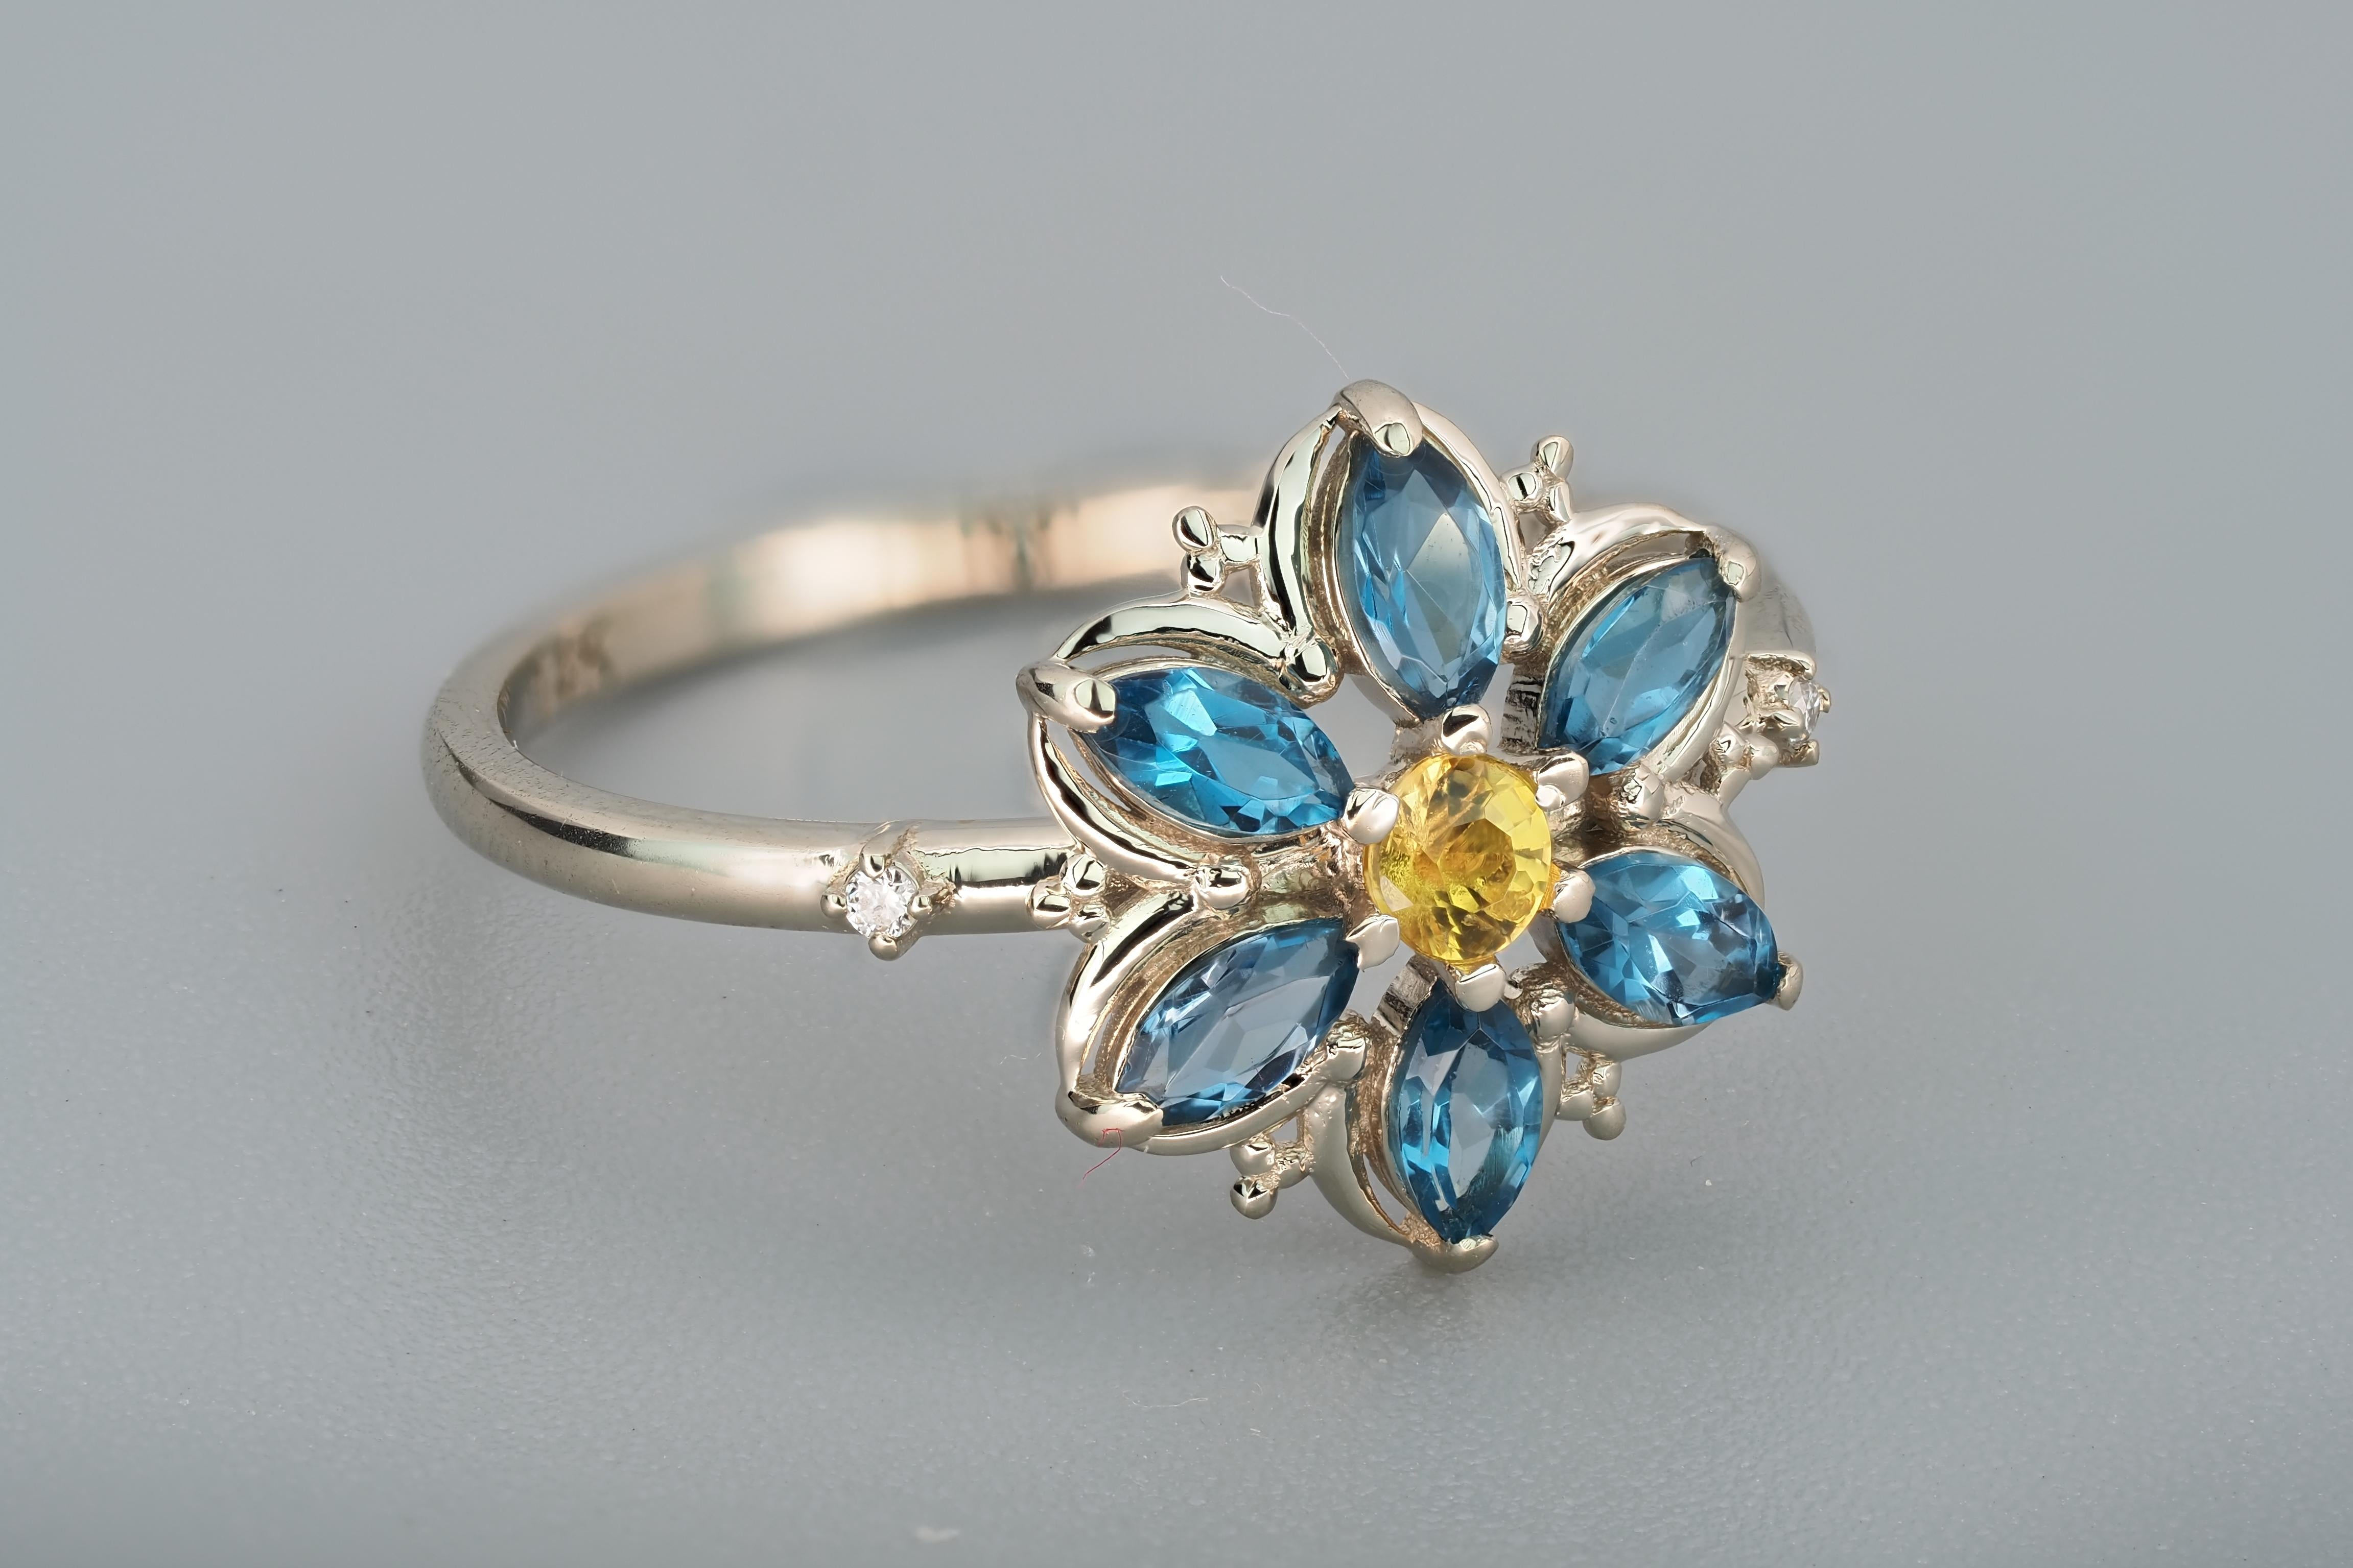 For Sale:  14k Gold Forget Me Not Flower Ring with Topaz and Sapphire! 7